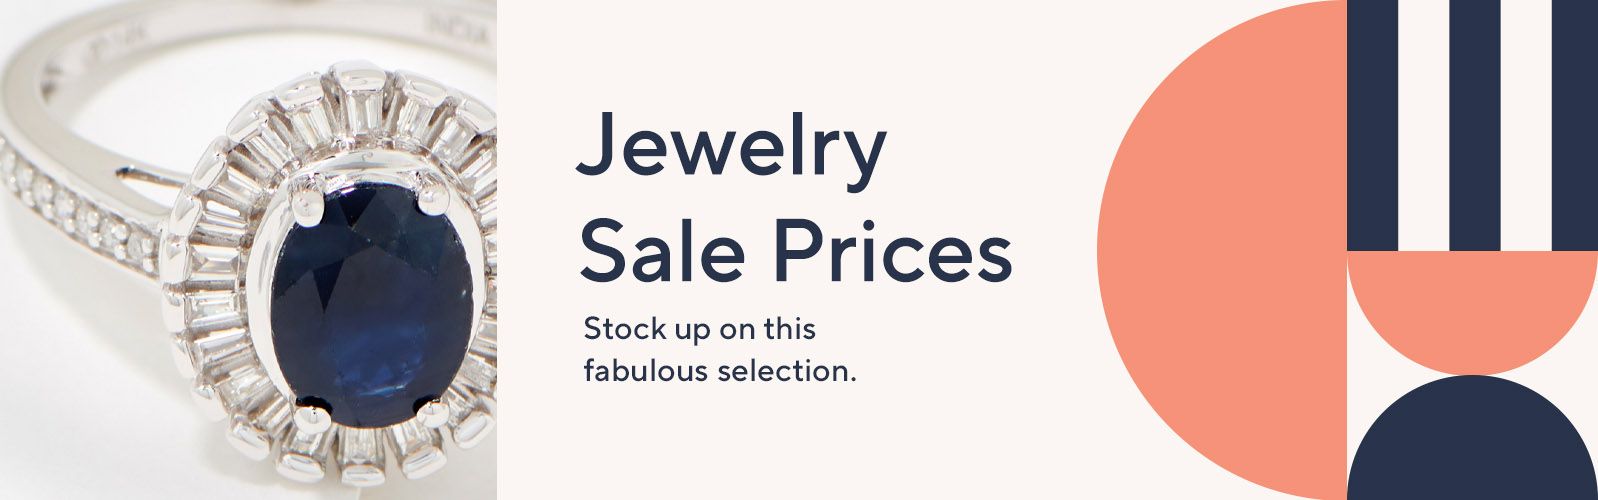 Jewelry Sale Prices- Stock up on this fabulous selection.